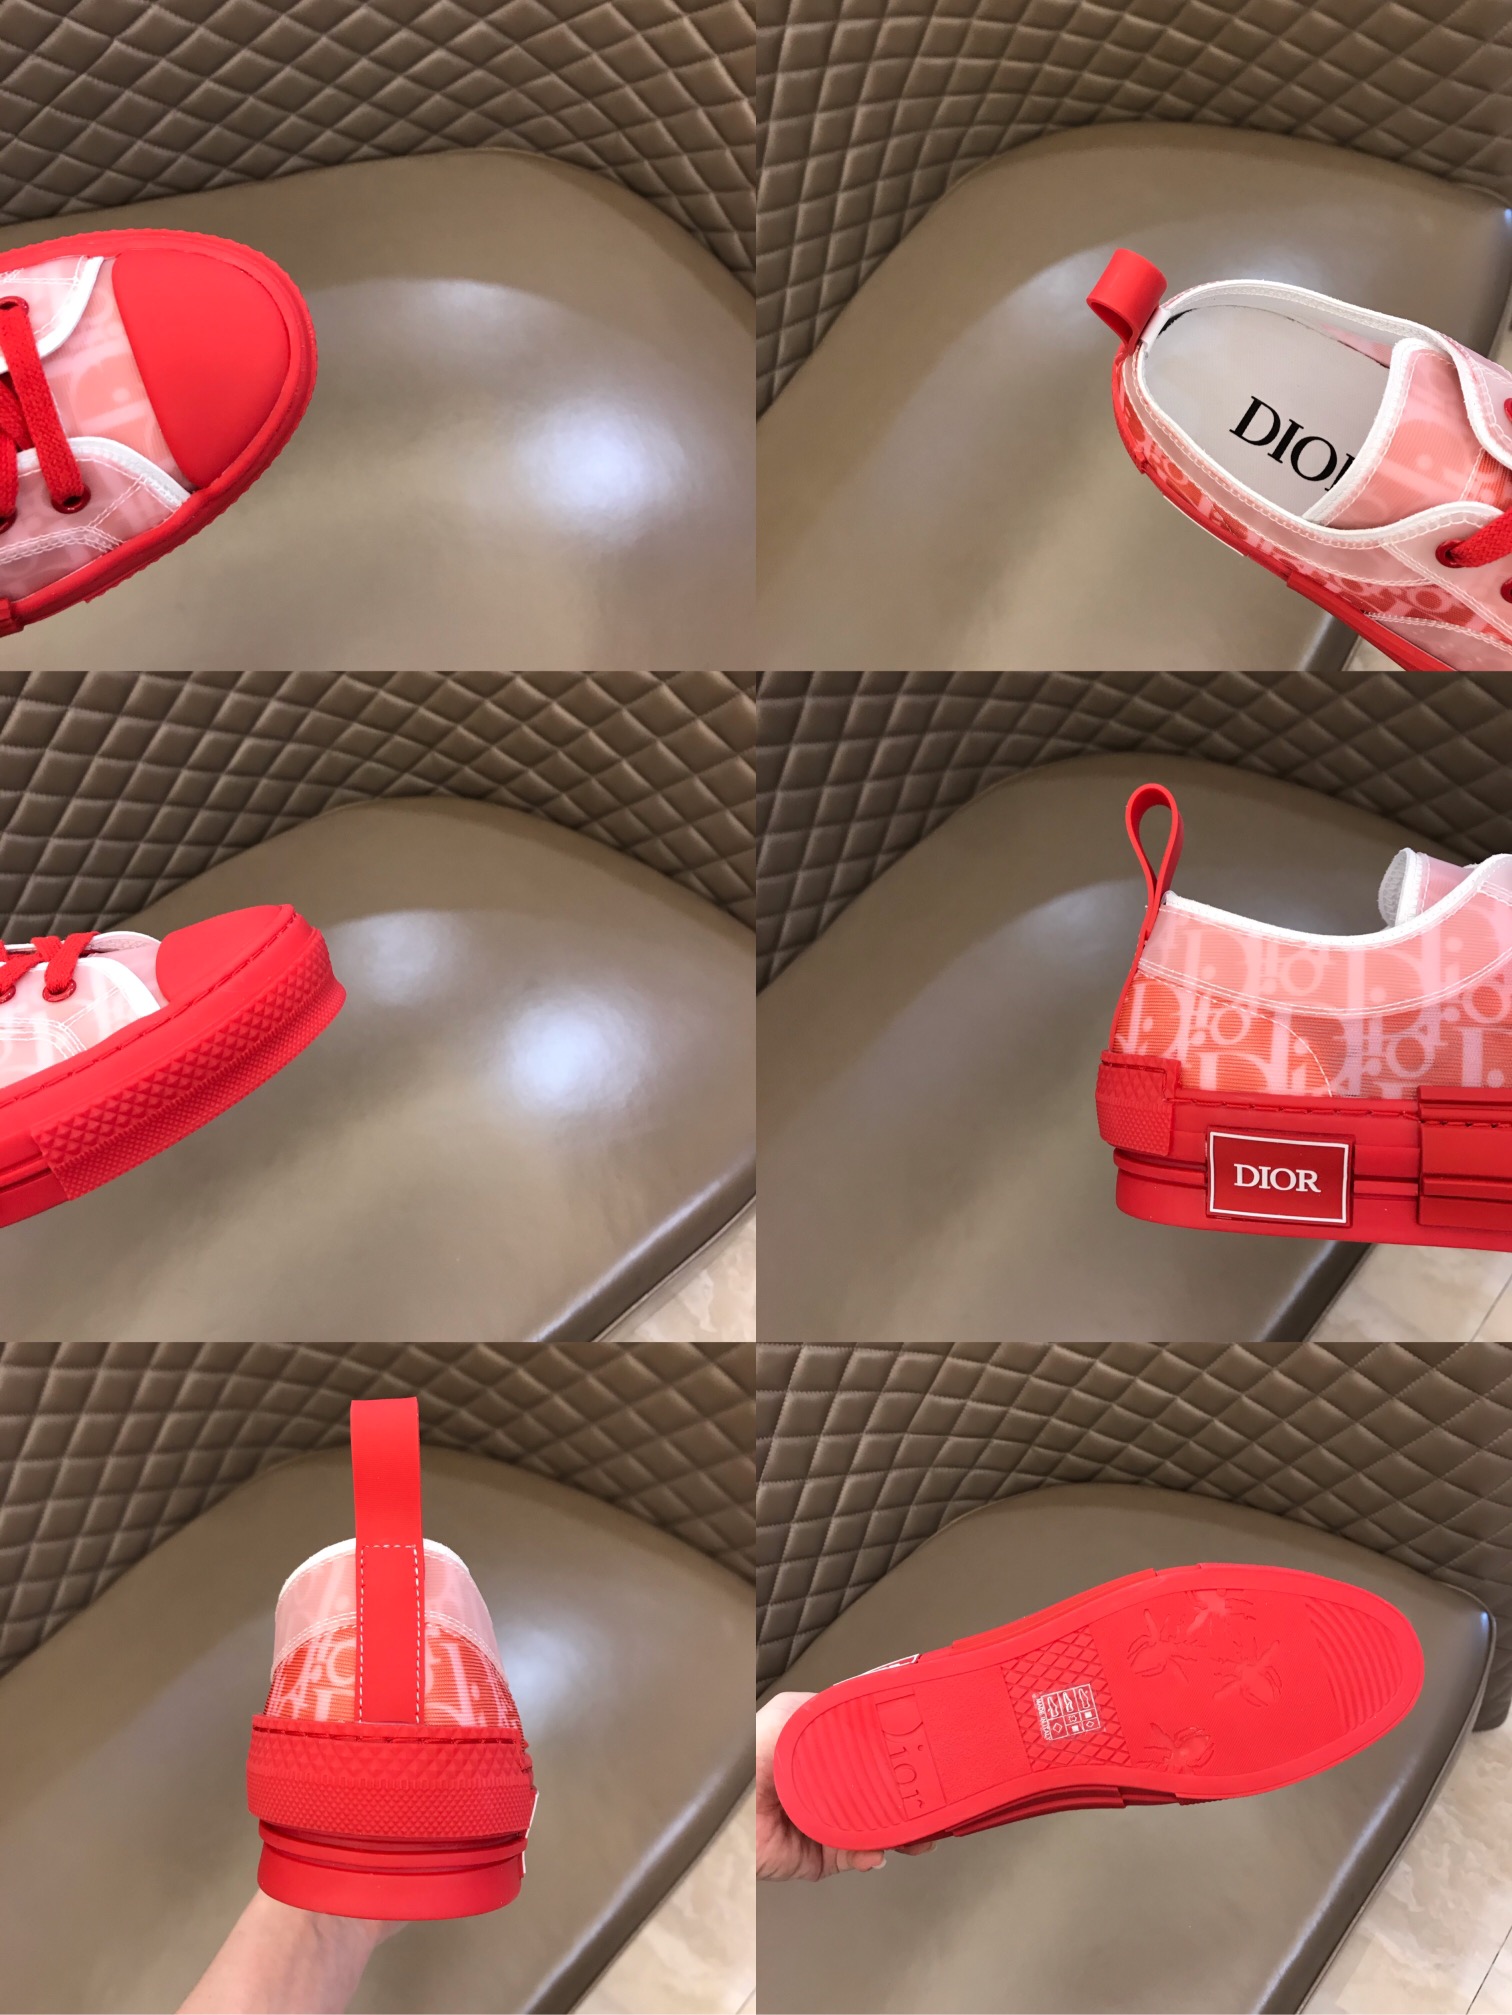 Dior Sneaker B23 in Red low